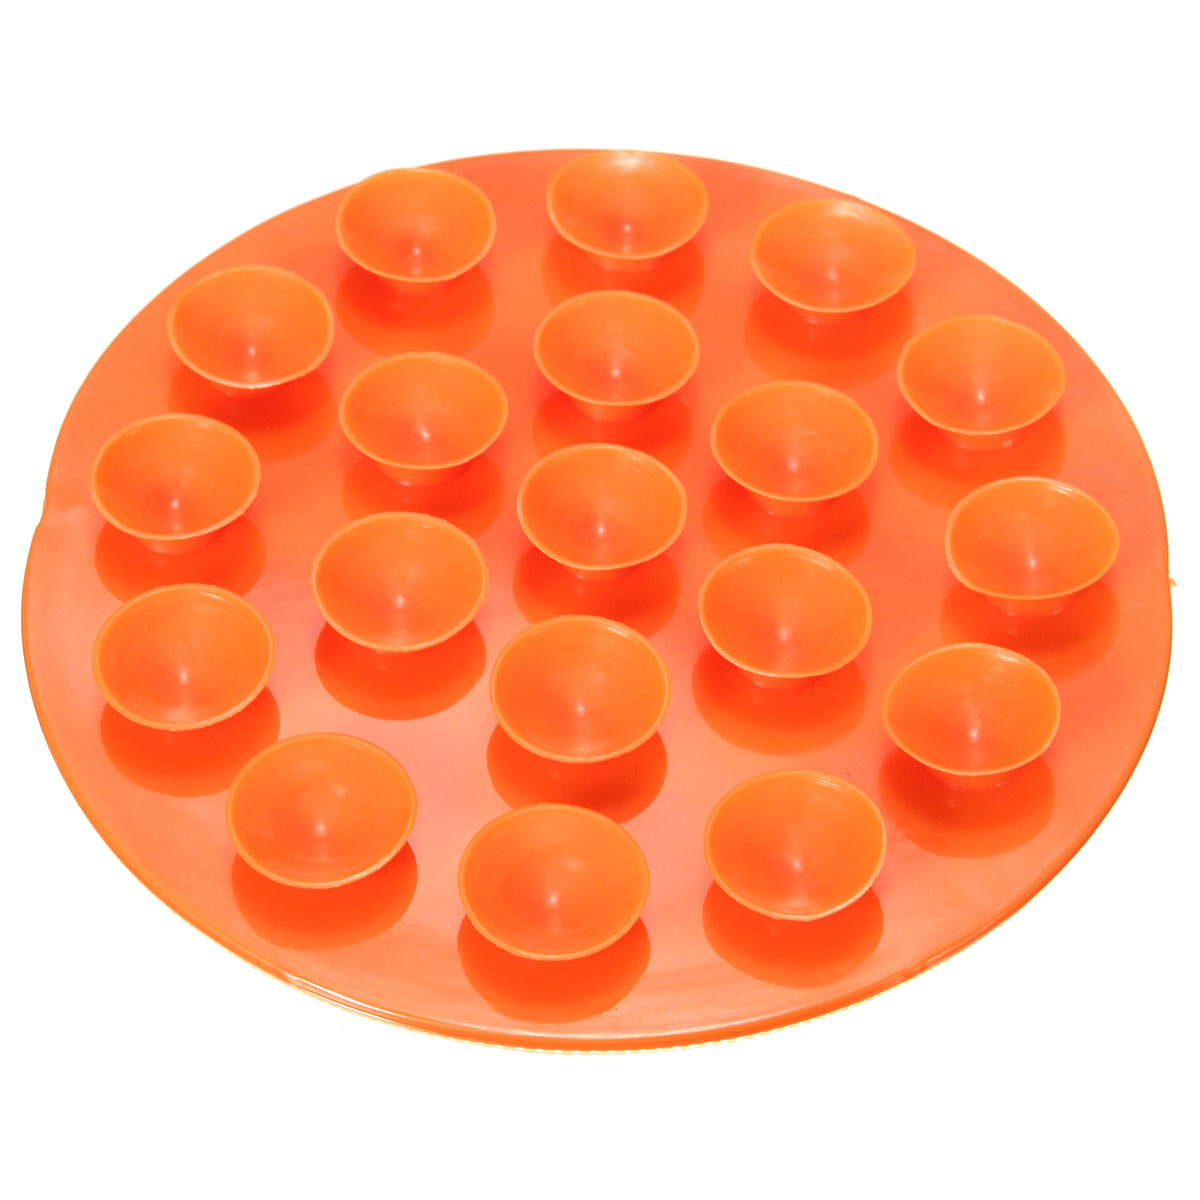 Kids-Baby-Bowl-Pad-Milk-Bottle-Silicone-Magical-Anti-Slip-Meal-Suction-Mat-Kitchen-Dishes-Dinnerware-961489